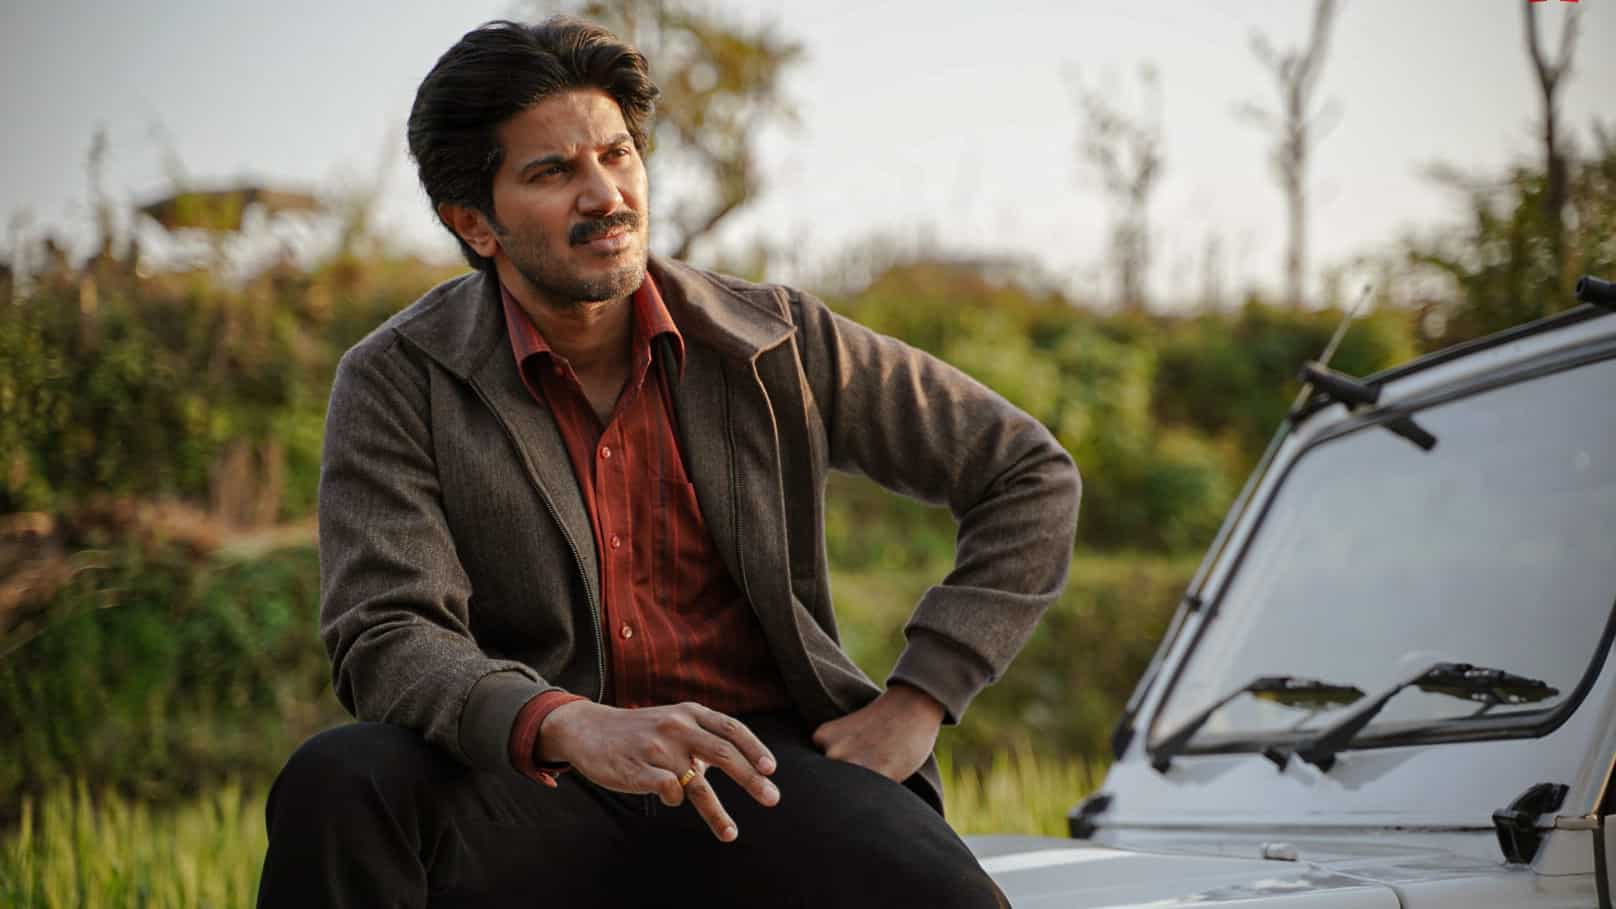 Dulquer Salmaan to make his web series debut with Guns and Gulaabs